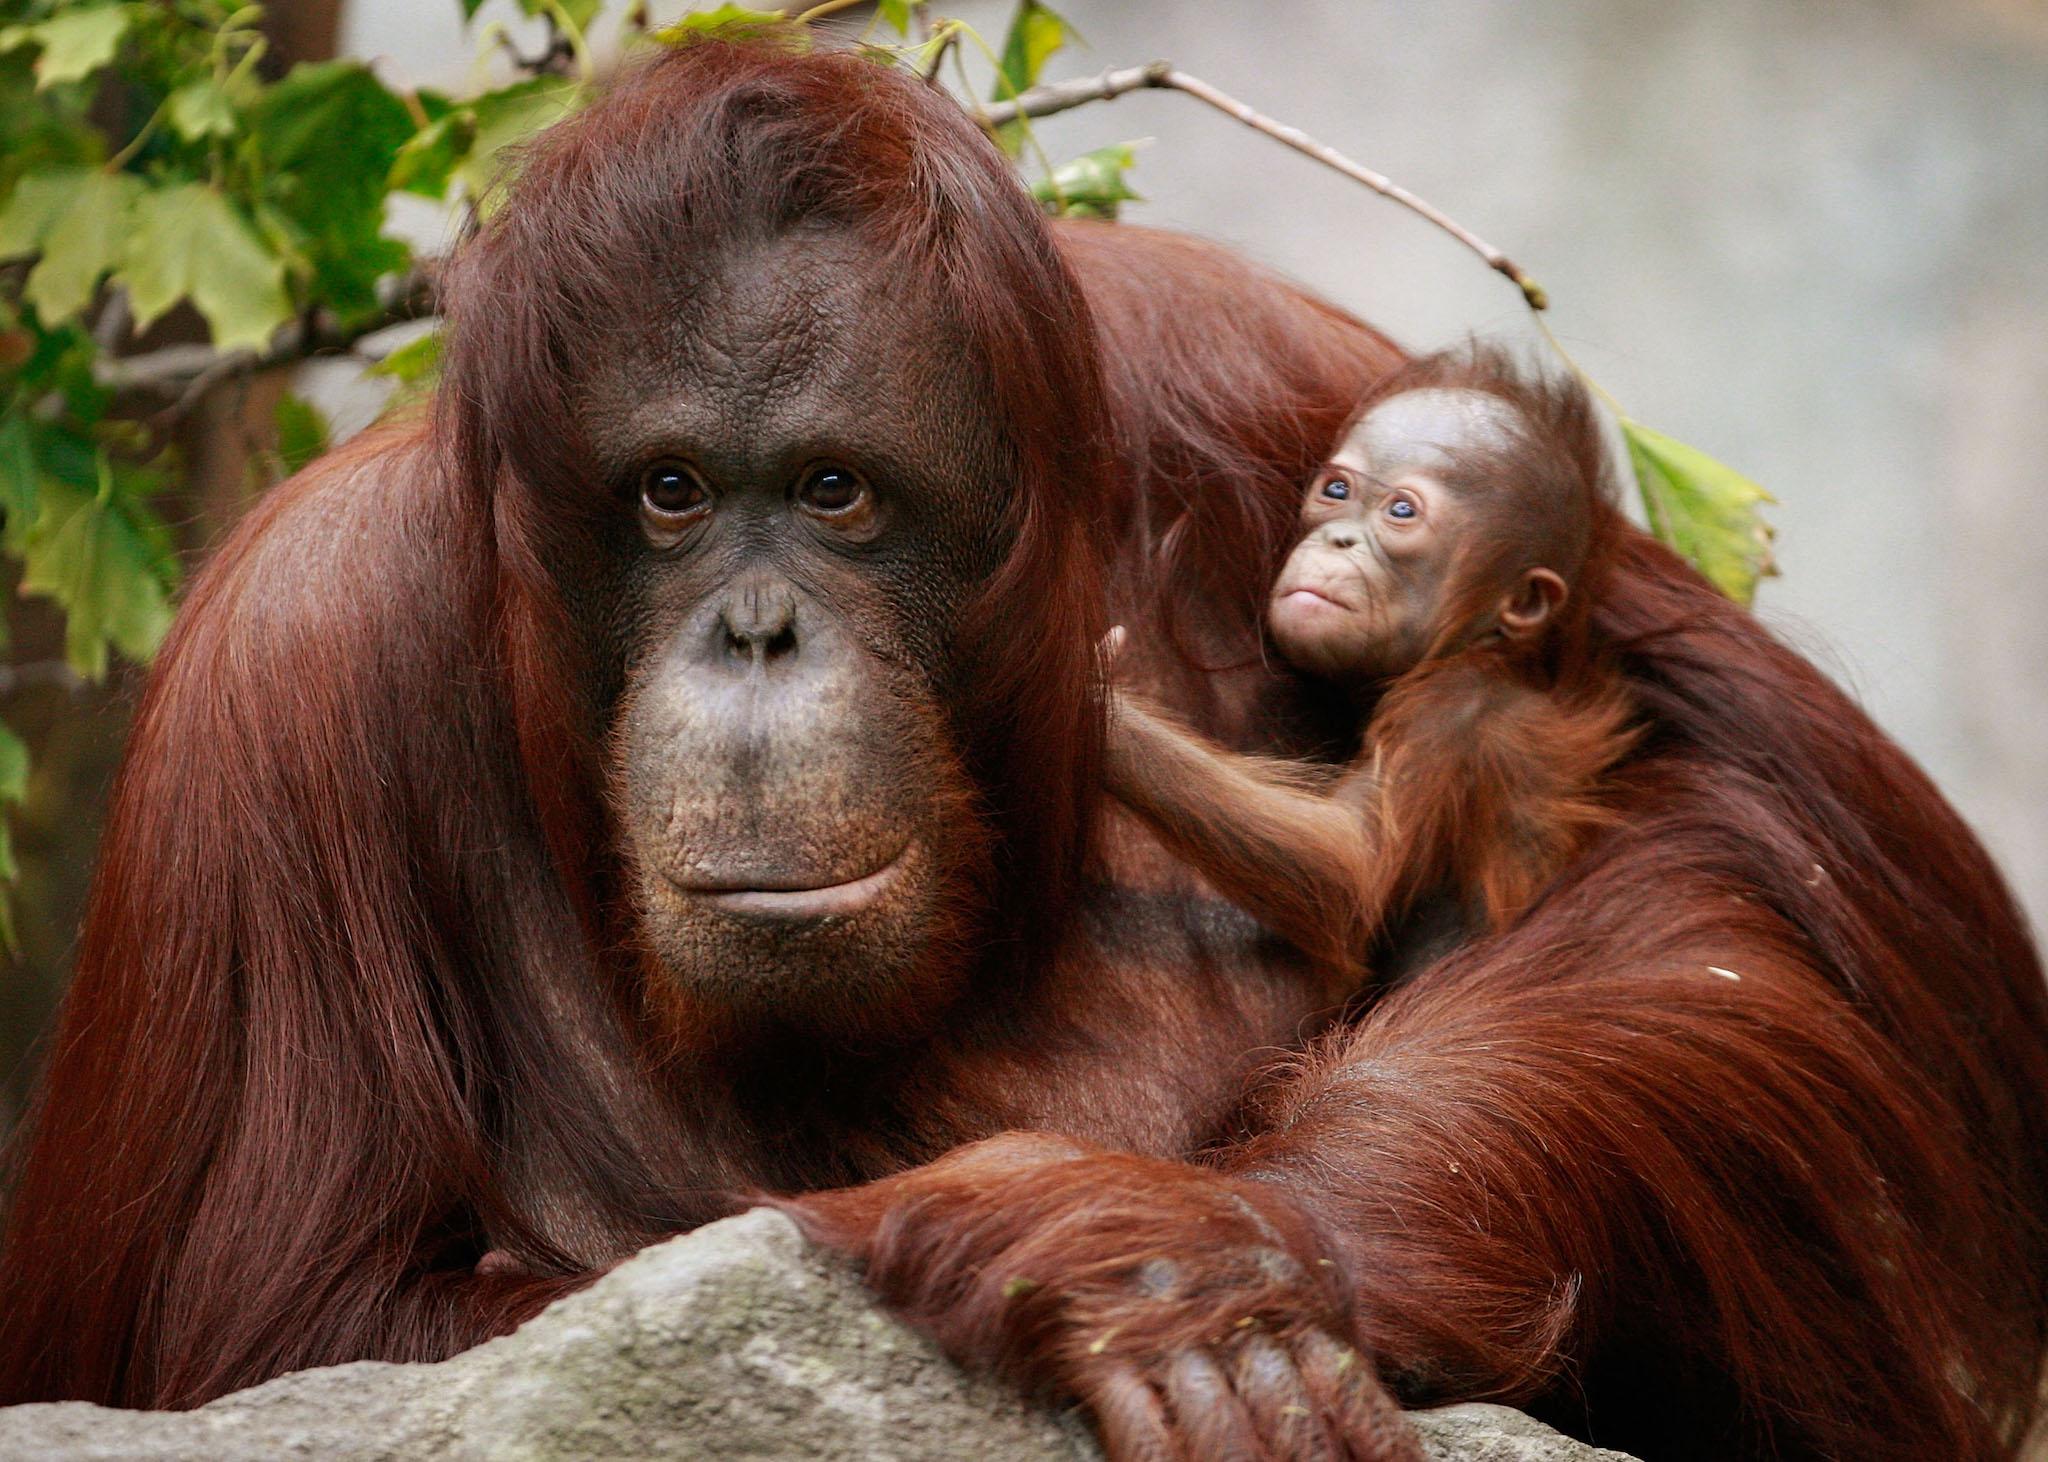 Borneo has lost half its orangutans due to hunting and habitat loss | The Independent | The Independent